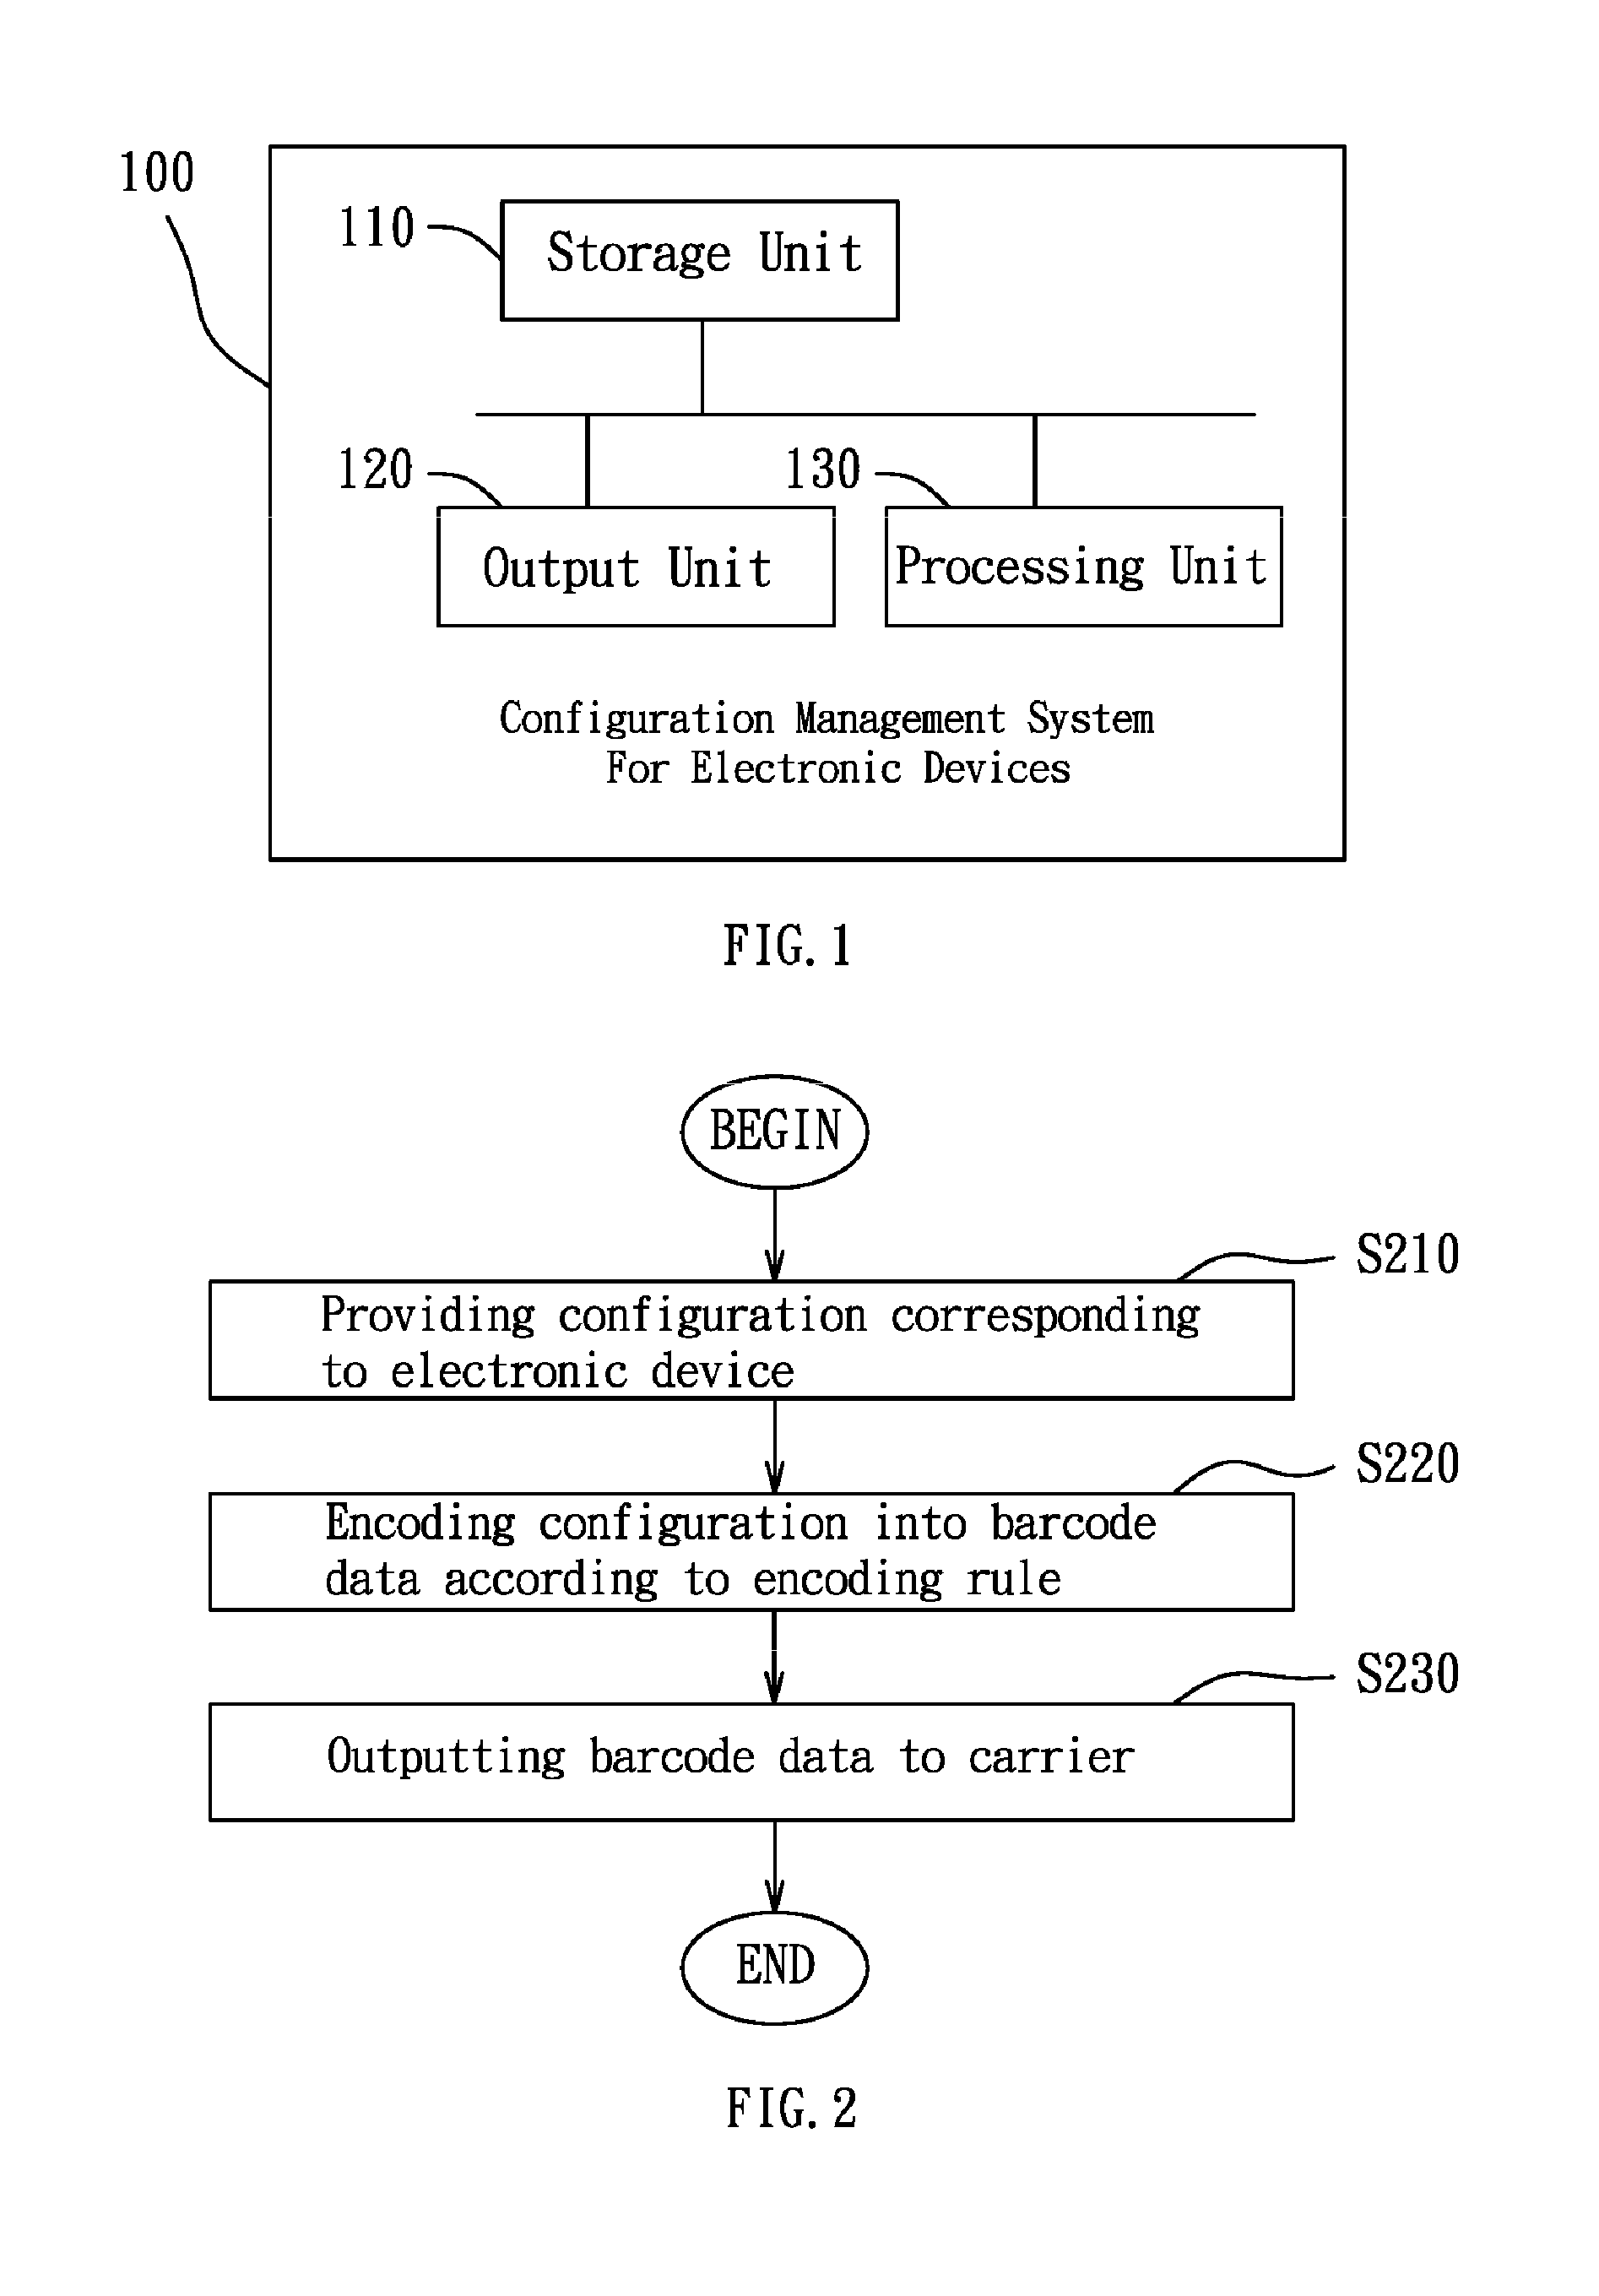 Configuration Management Systems And Methods for Electronic Devices